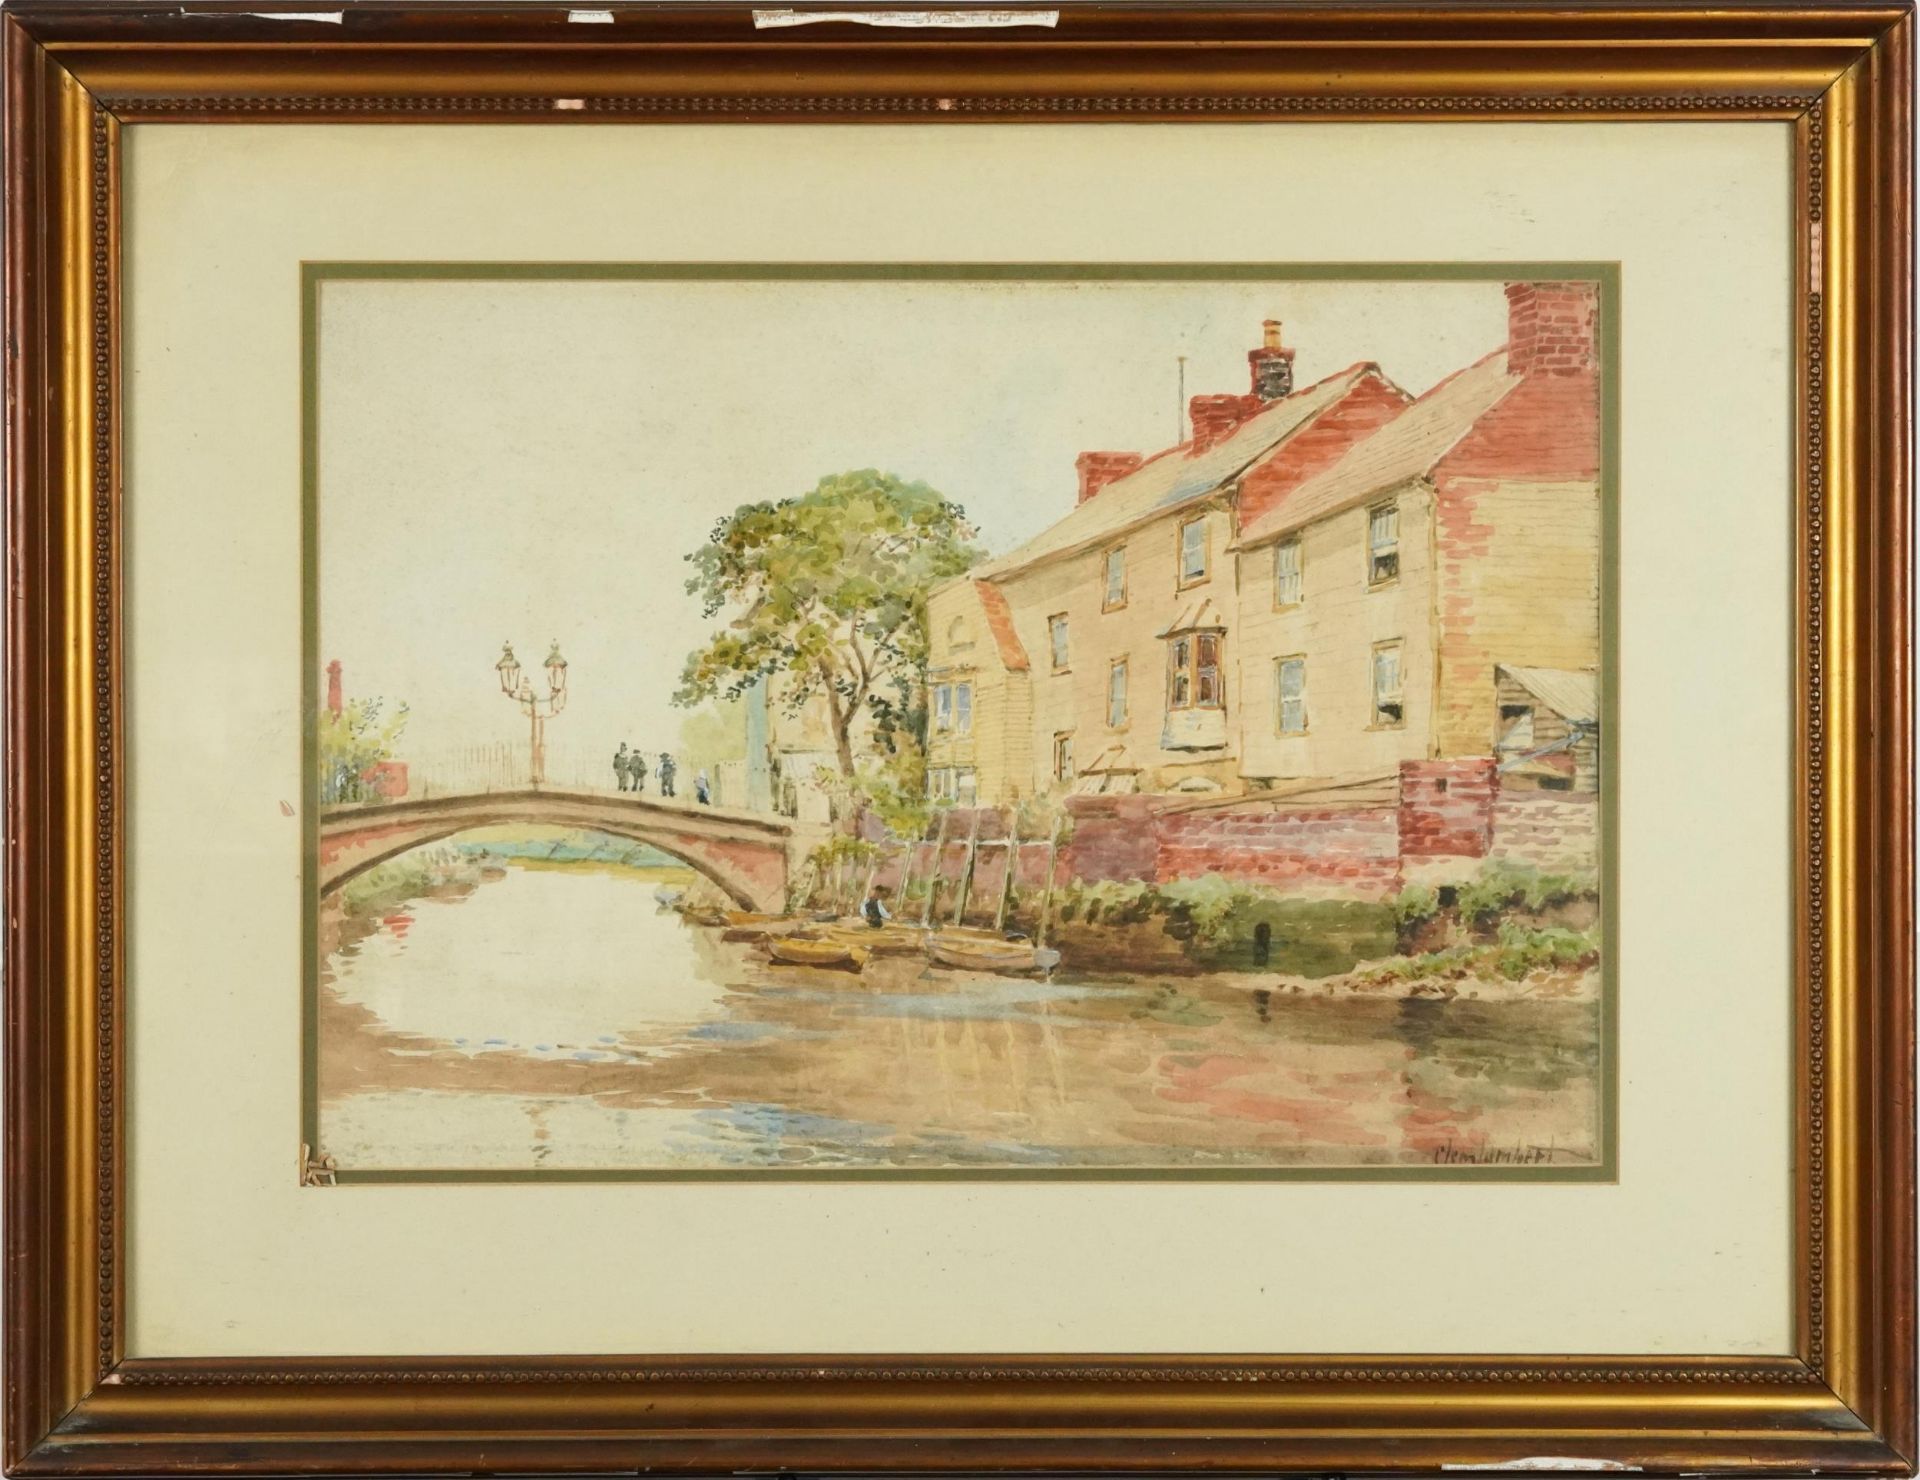 Clem Lambert - Cliff Bridge Lewes, early 20th century watercolour, mounted, framed and glazed, - Image 2 of 4